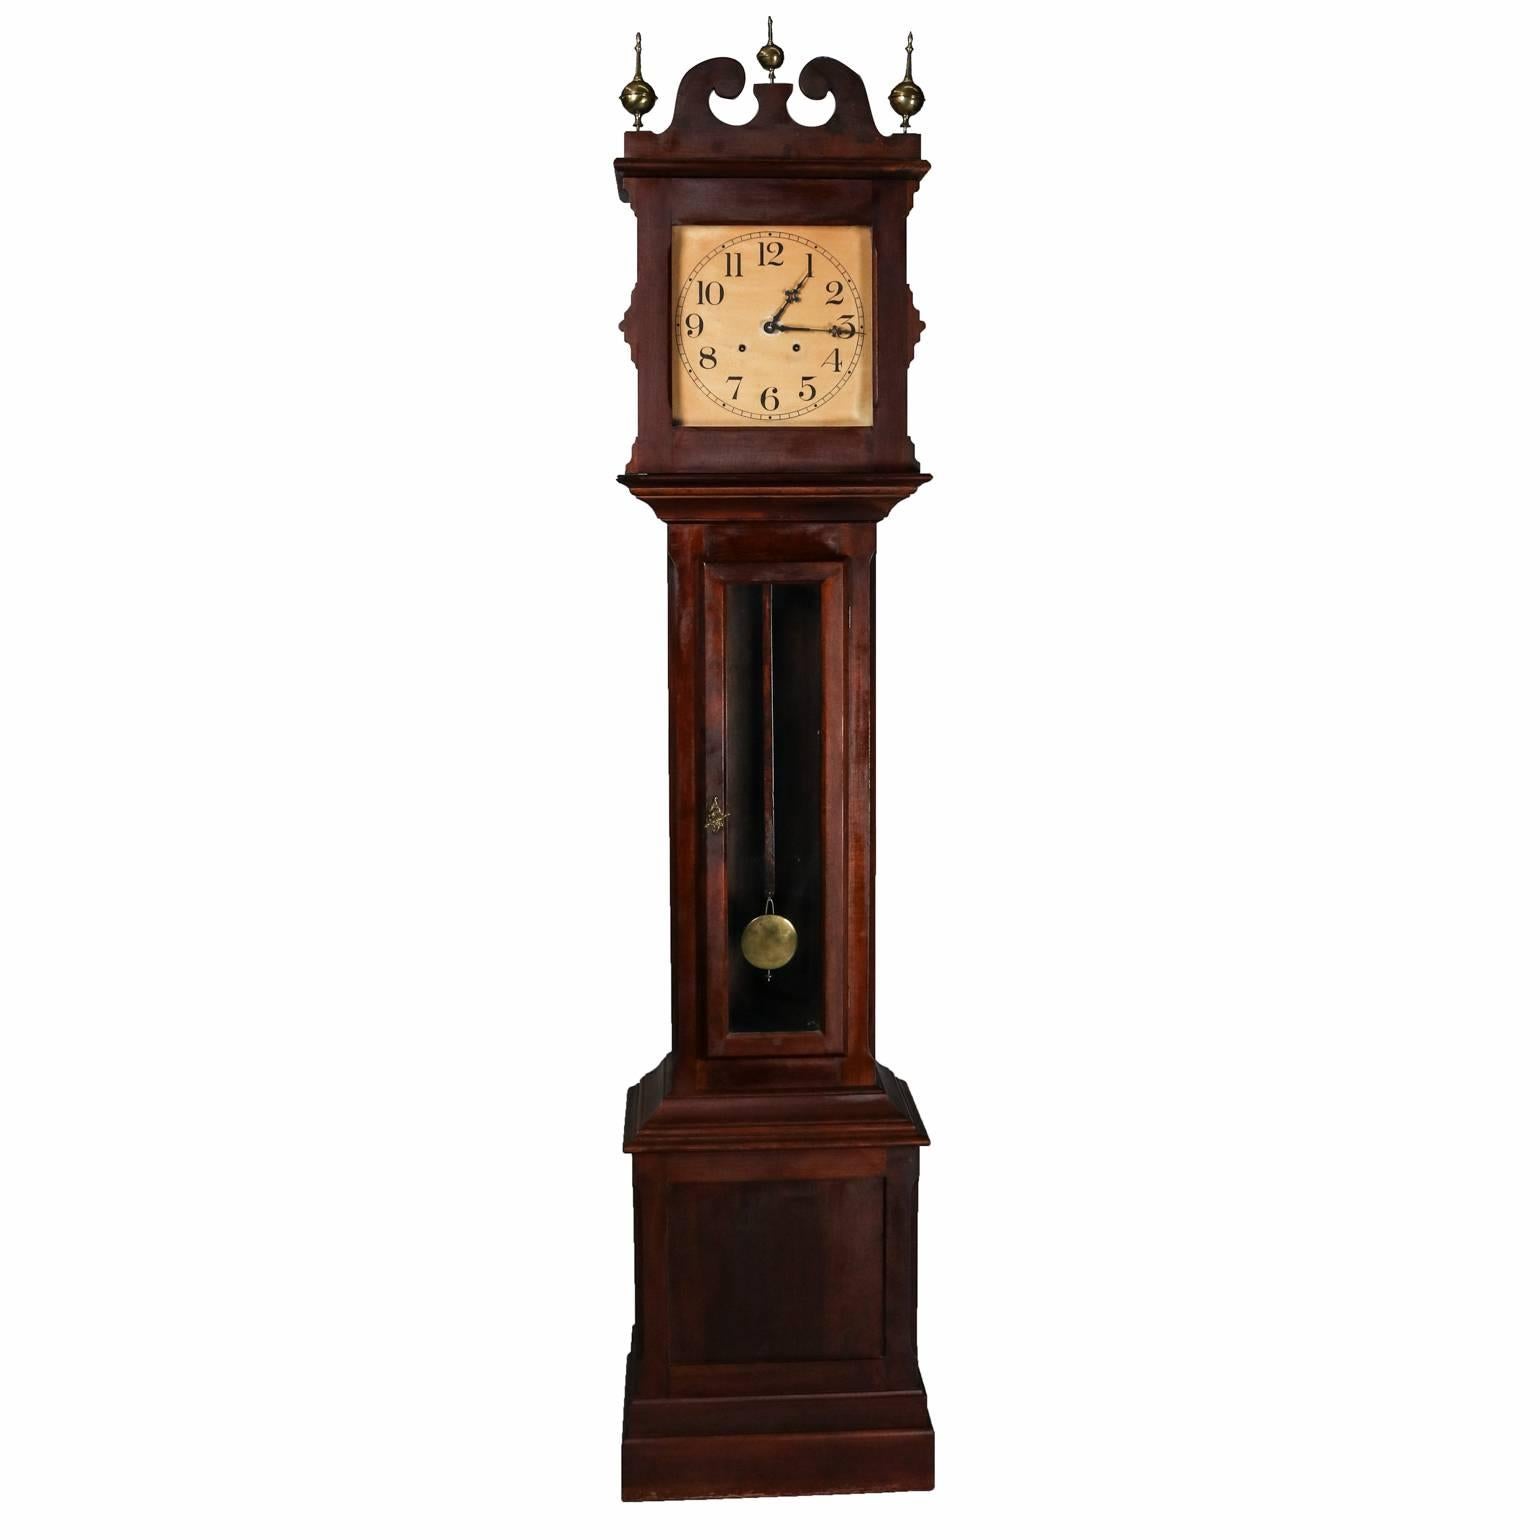 Antique mahogany Ithaca Clock Co. grandfather tall case clock features broken arch pediment and bronze spherical finials, newspaper article enclosed, with key, circa 1890

Measures: 88" H x 18" W x 11" D.